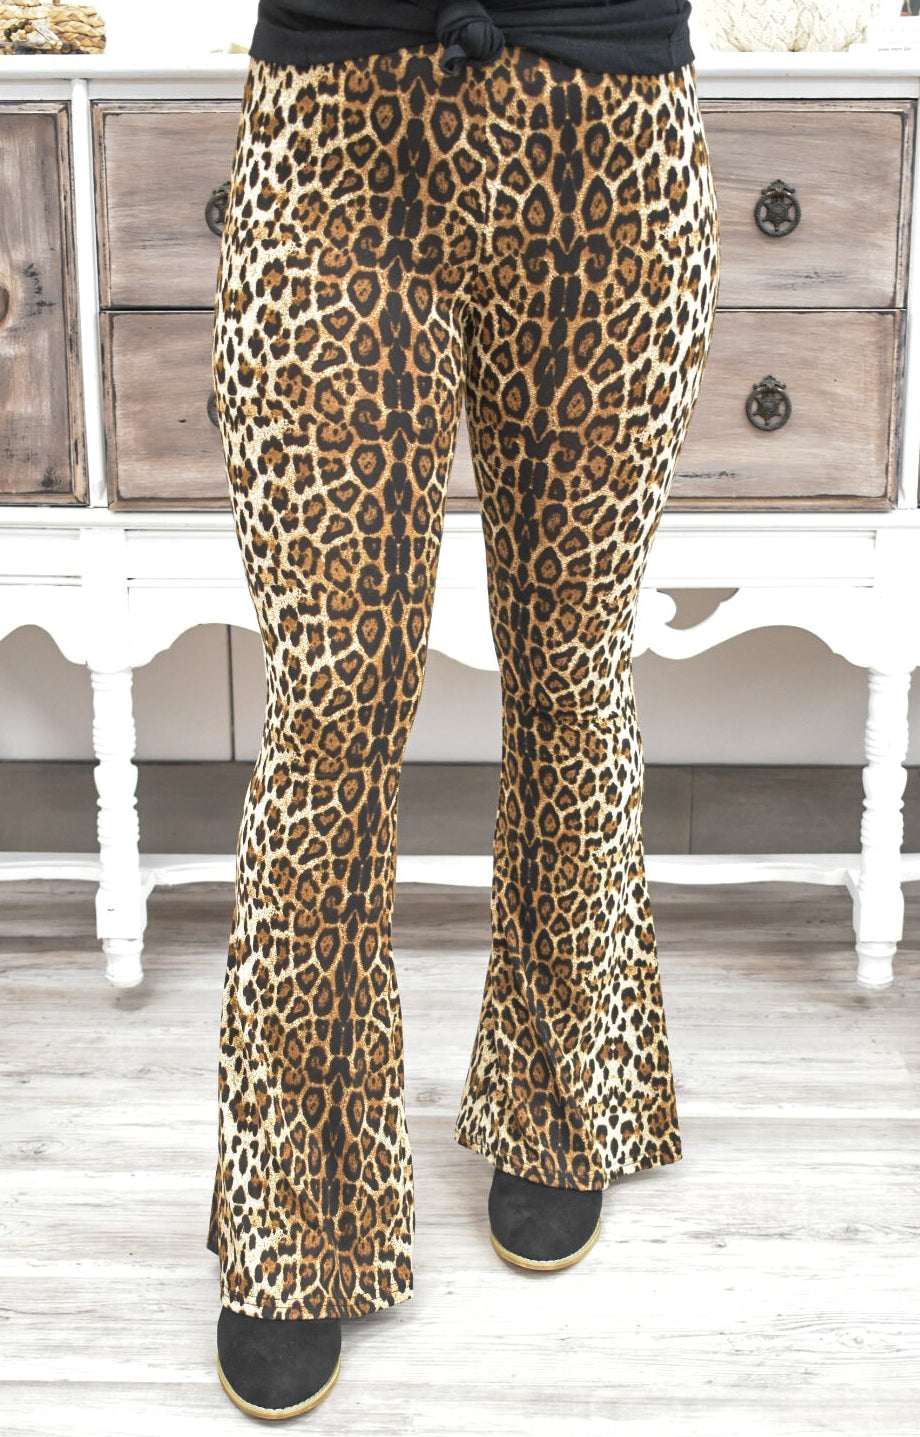 Wild for Leopard Pants - Southern Grace Creations